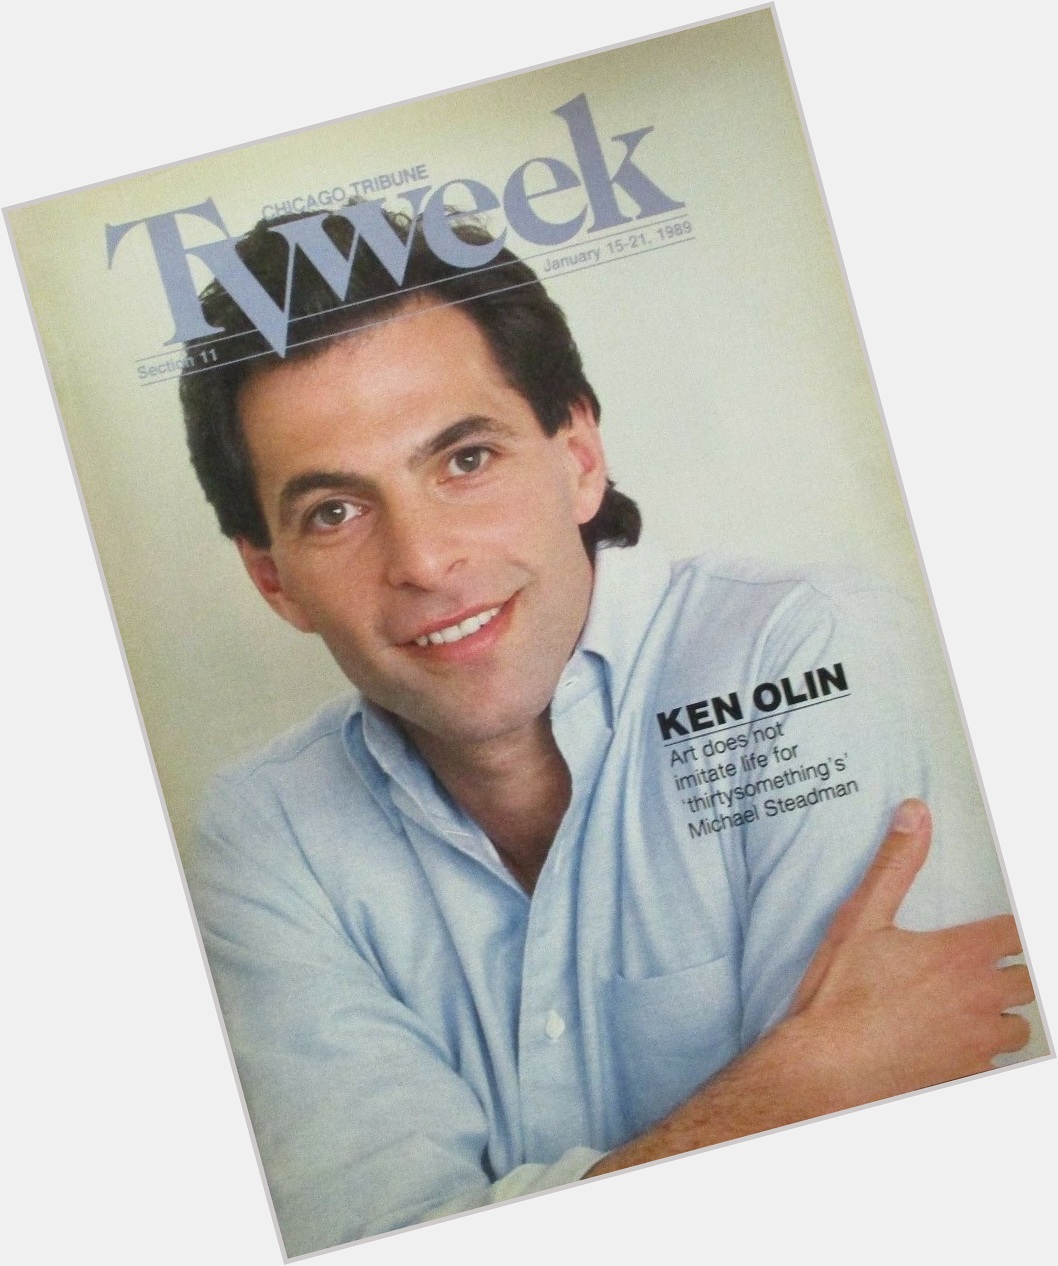 Happy Birthday to Chicago\s own Ken Olin.
Born on this day in 1954
Chicago Tribune TV Week.  April 21-27, 1974 